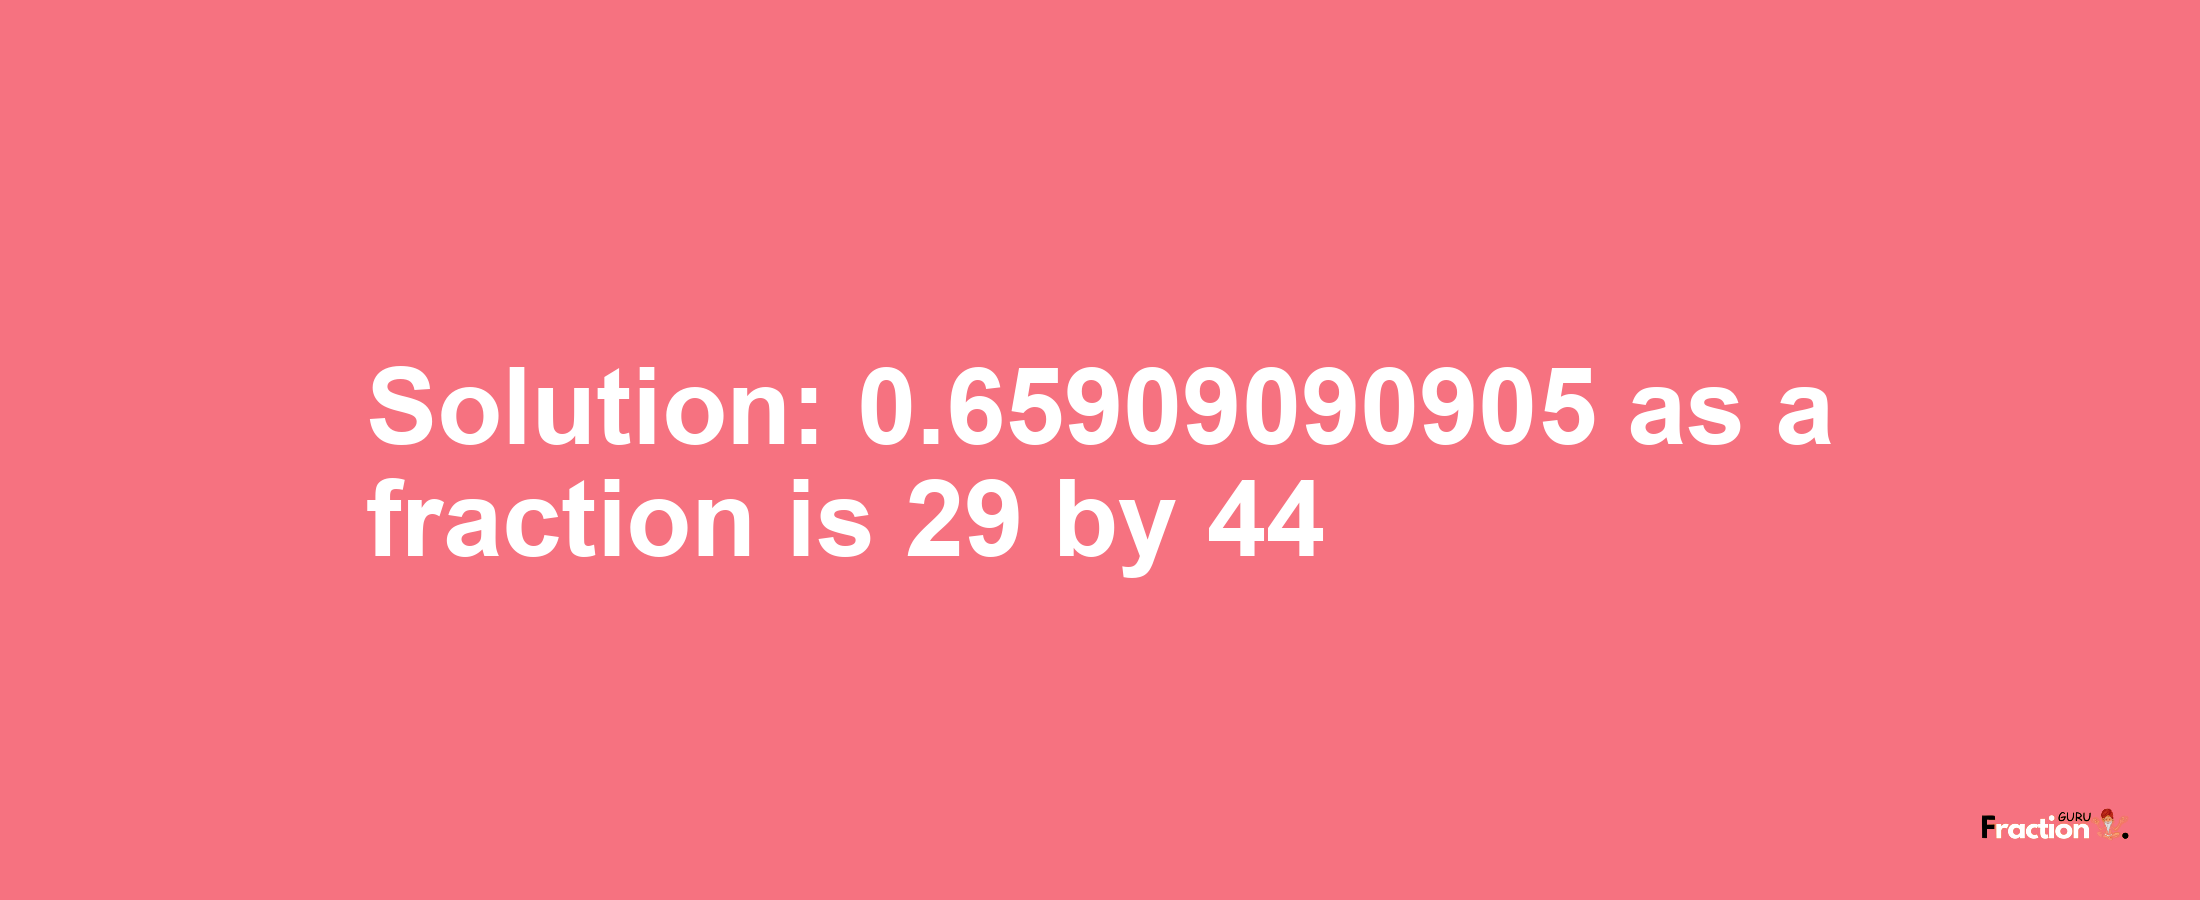 Solution:0.65909090905 as a fraction is 29/44